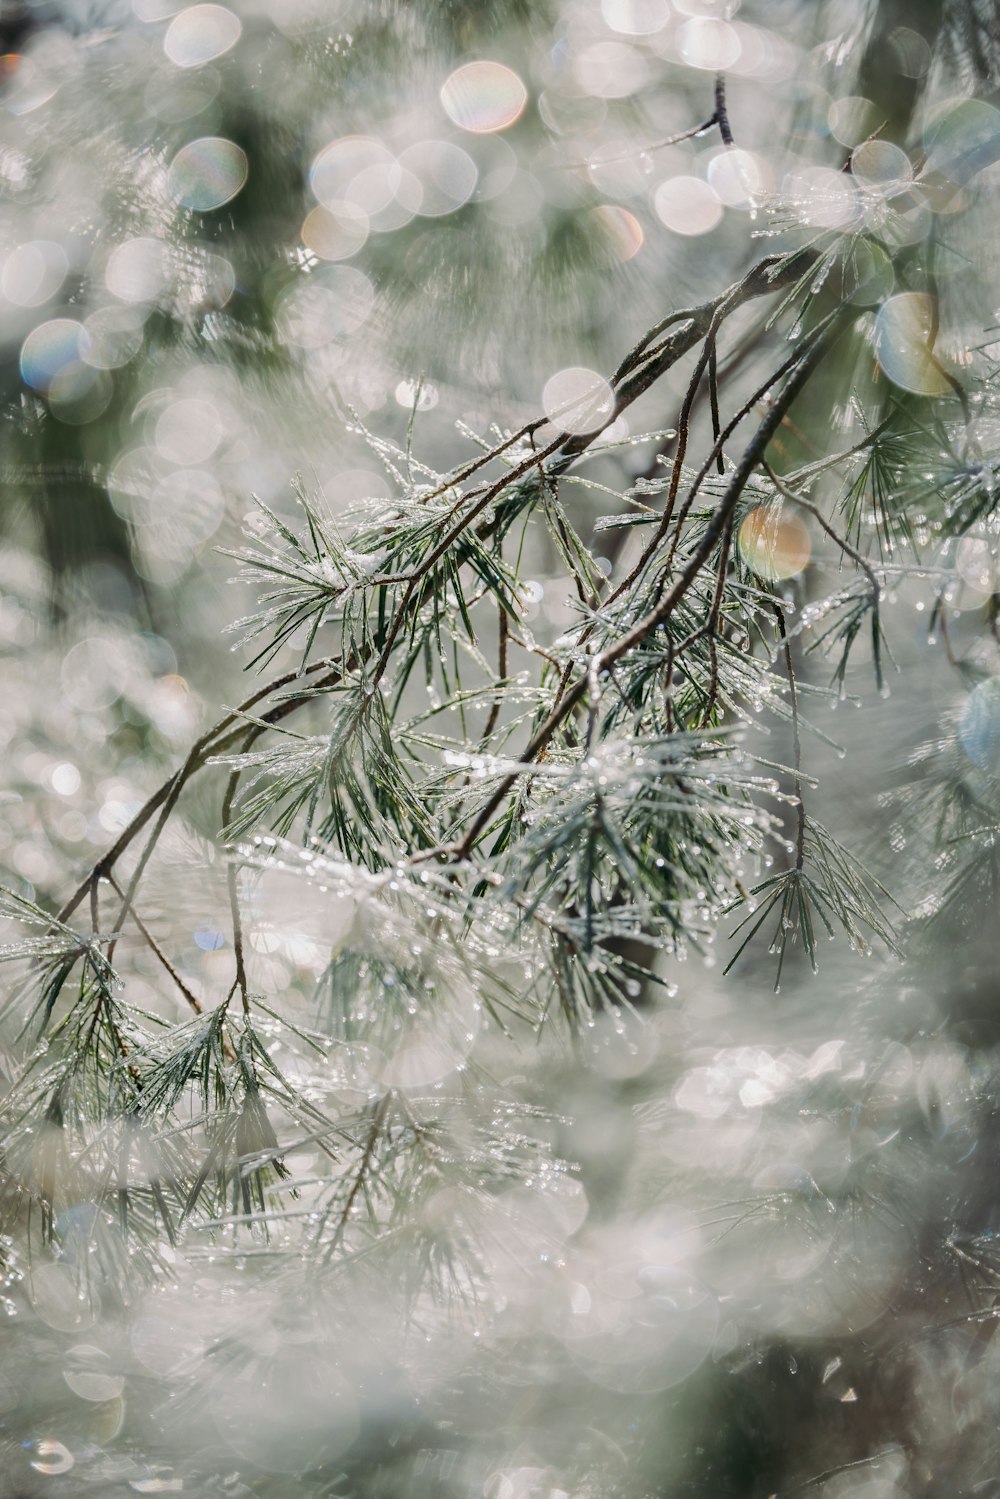 a close up of a pine tree with water droplets